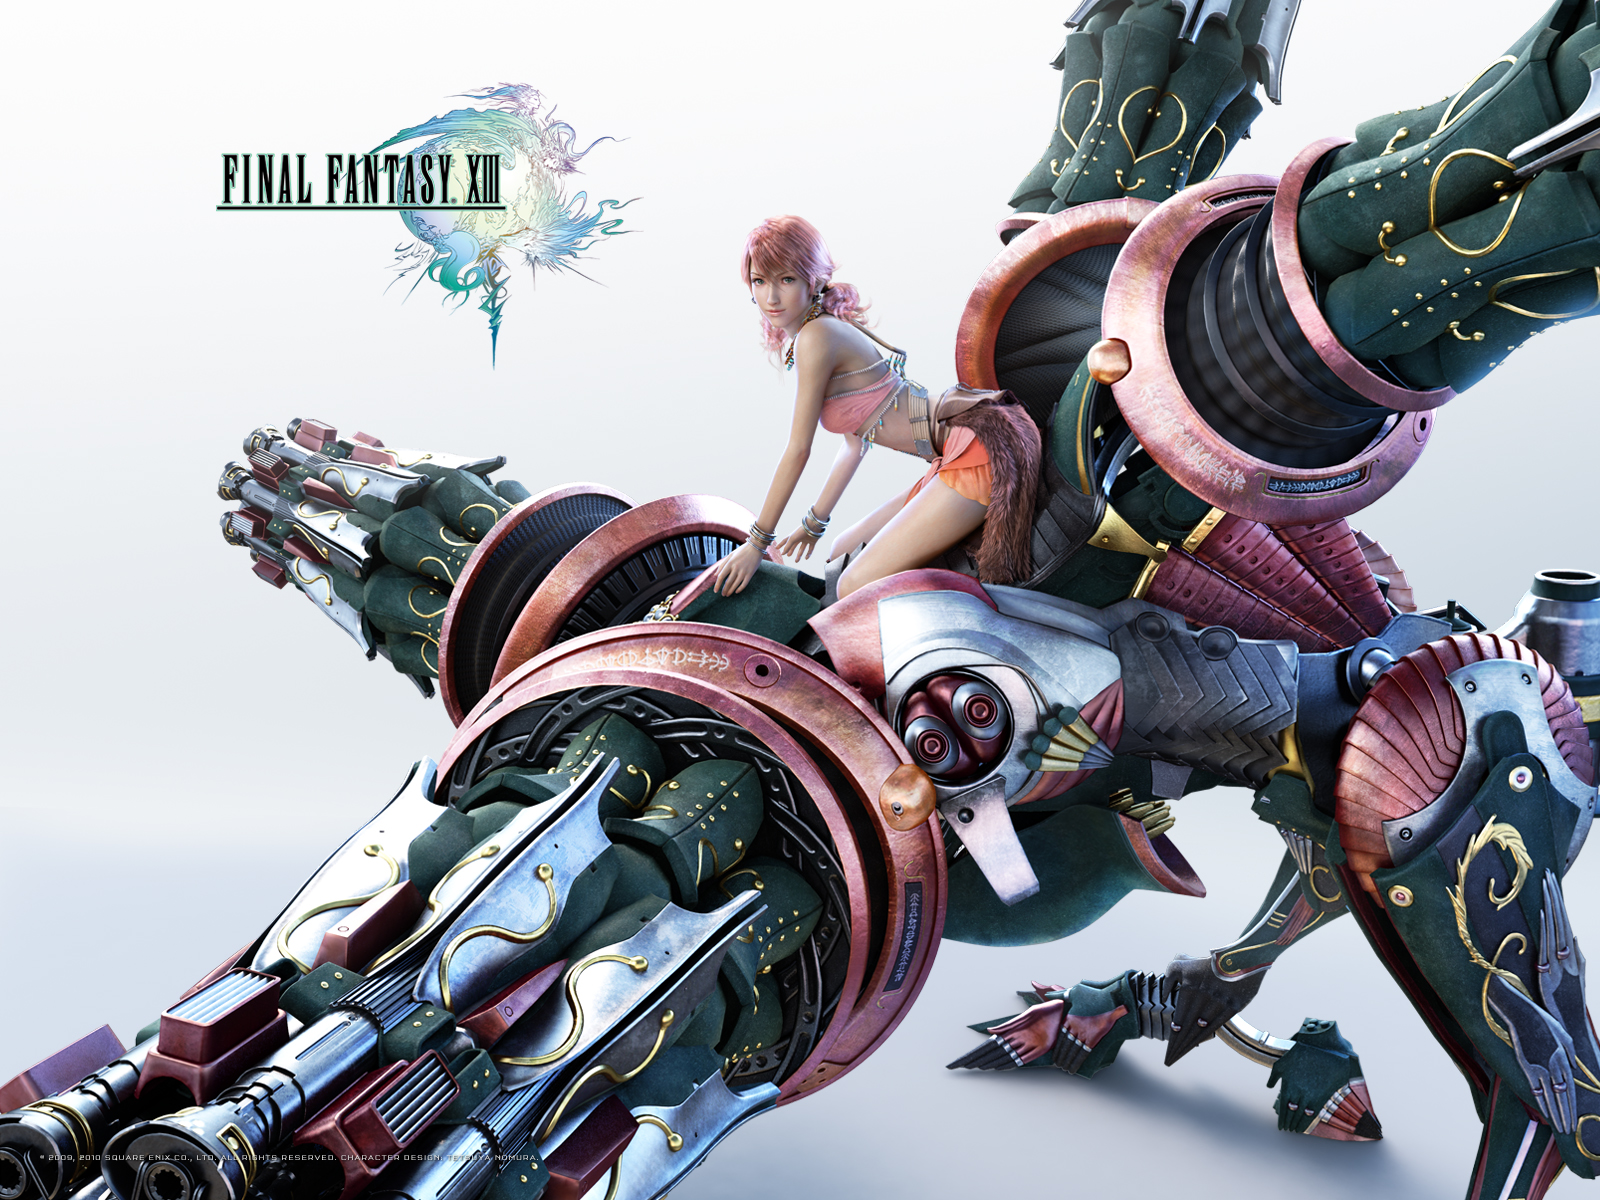 Free Download Final Fantasy Xiii Ffxiii Ff13 Wallpapers 1600x10 For Your Desktop Mobile Tablet Explore 49 Ff13 Wallpaper Ff7 Wallpaper Lightning Ff13 Wallpaper 13 Wallpaper